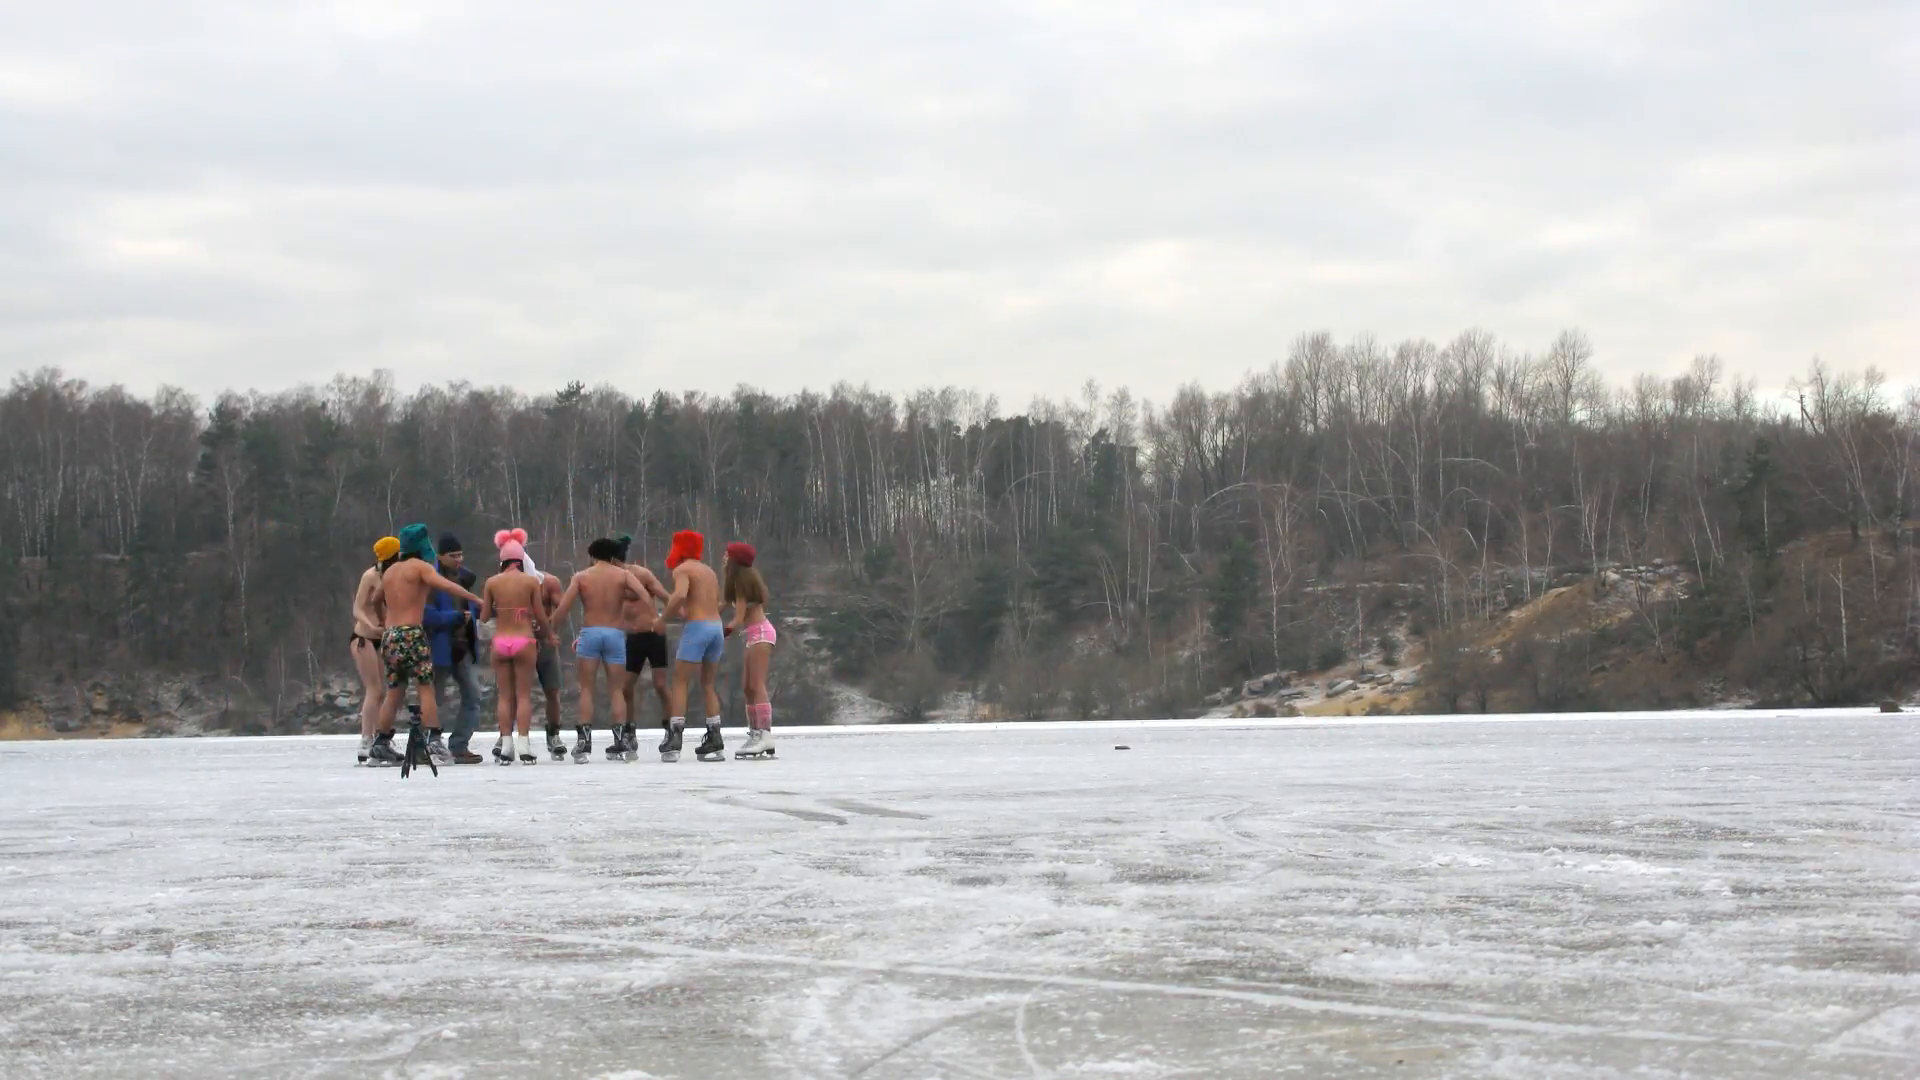 Shoot video of cheerful boys and girls in bathing suits, skating on ...